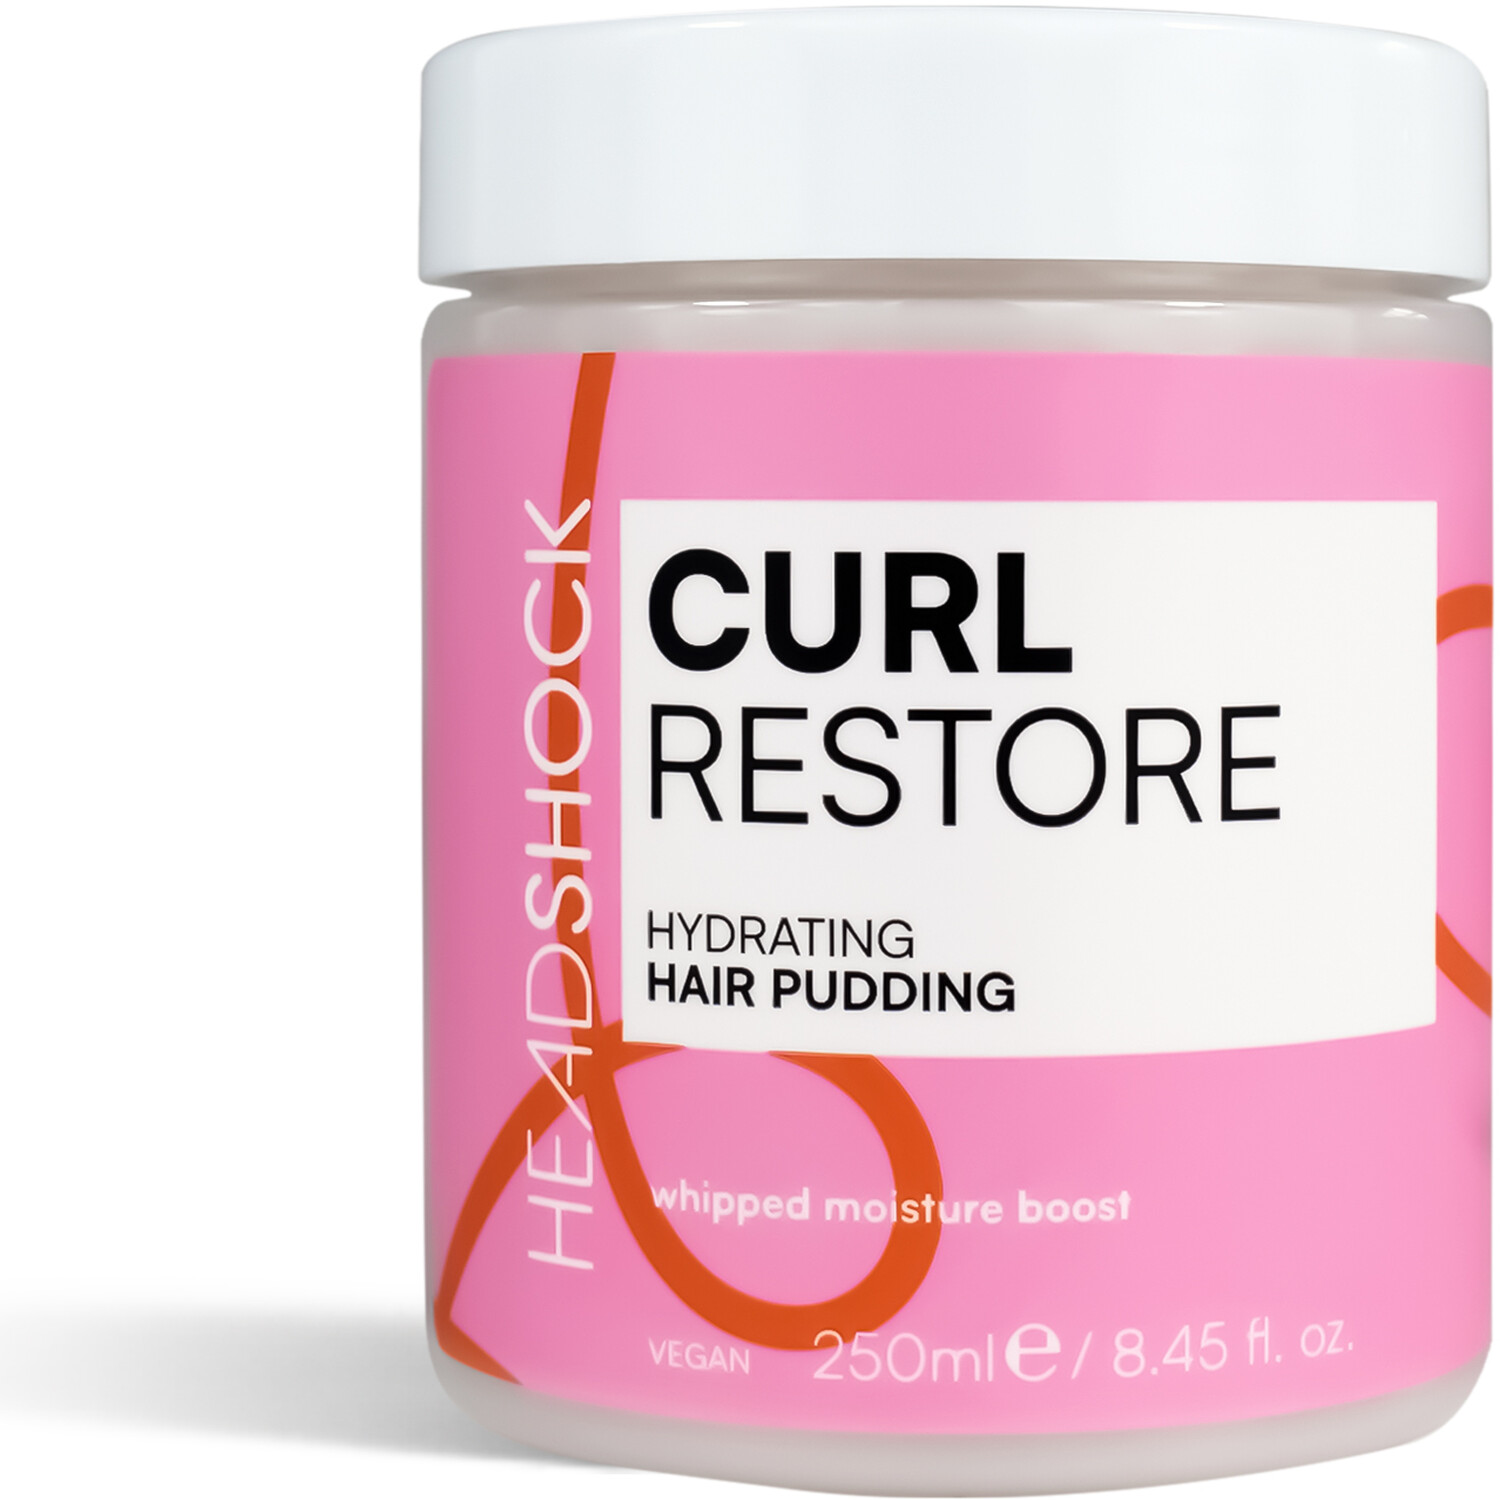 Headshock Curl Restore Hydrating Hair Pudding - Pink Image